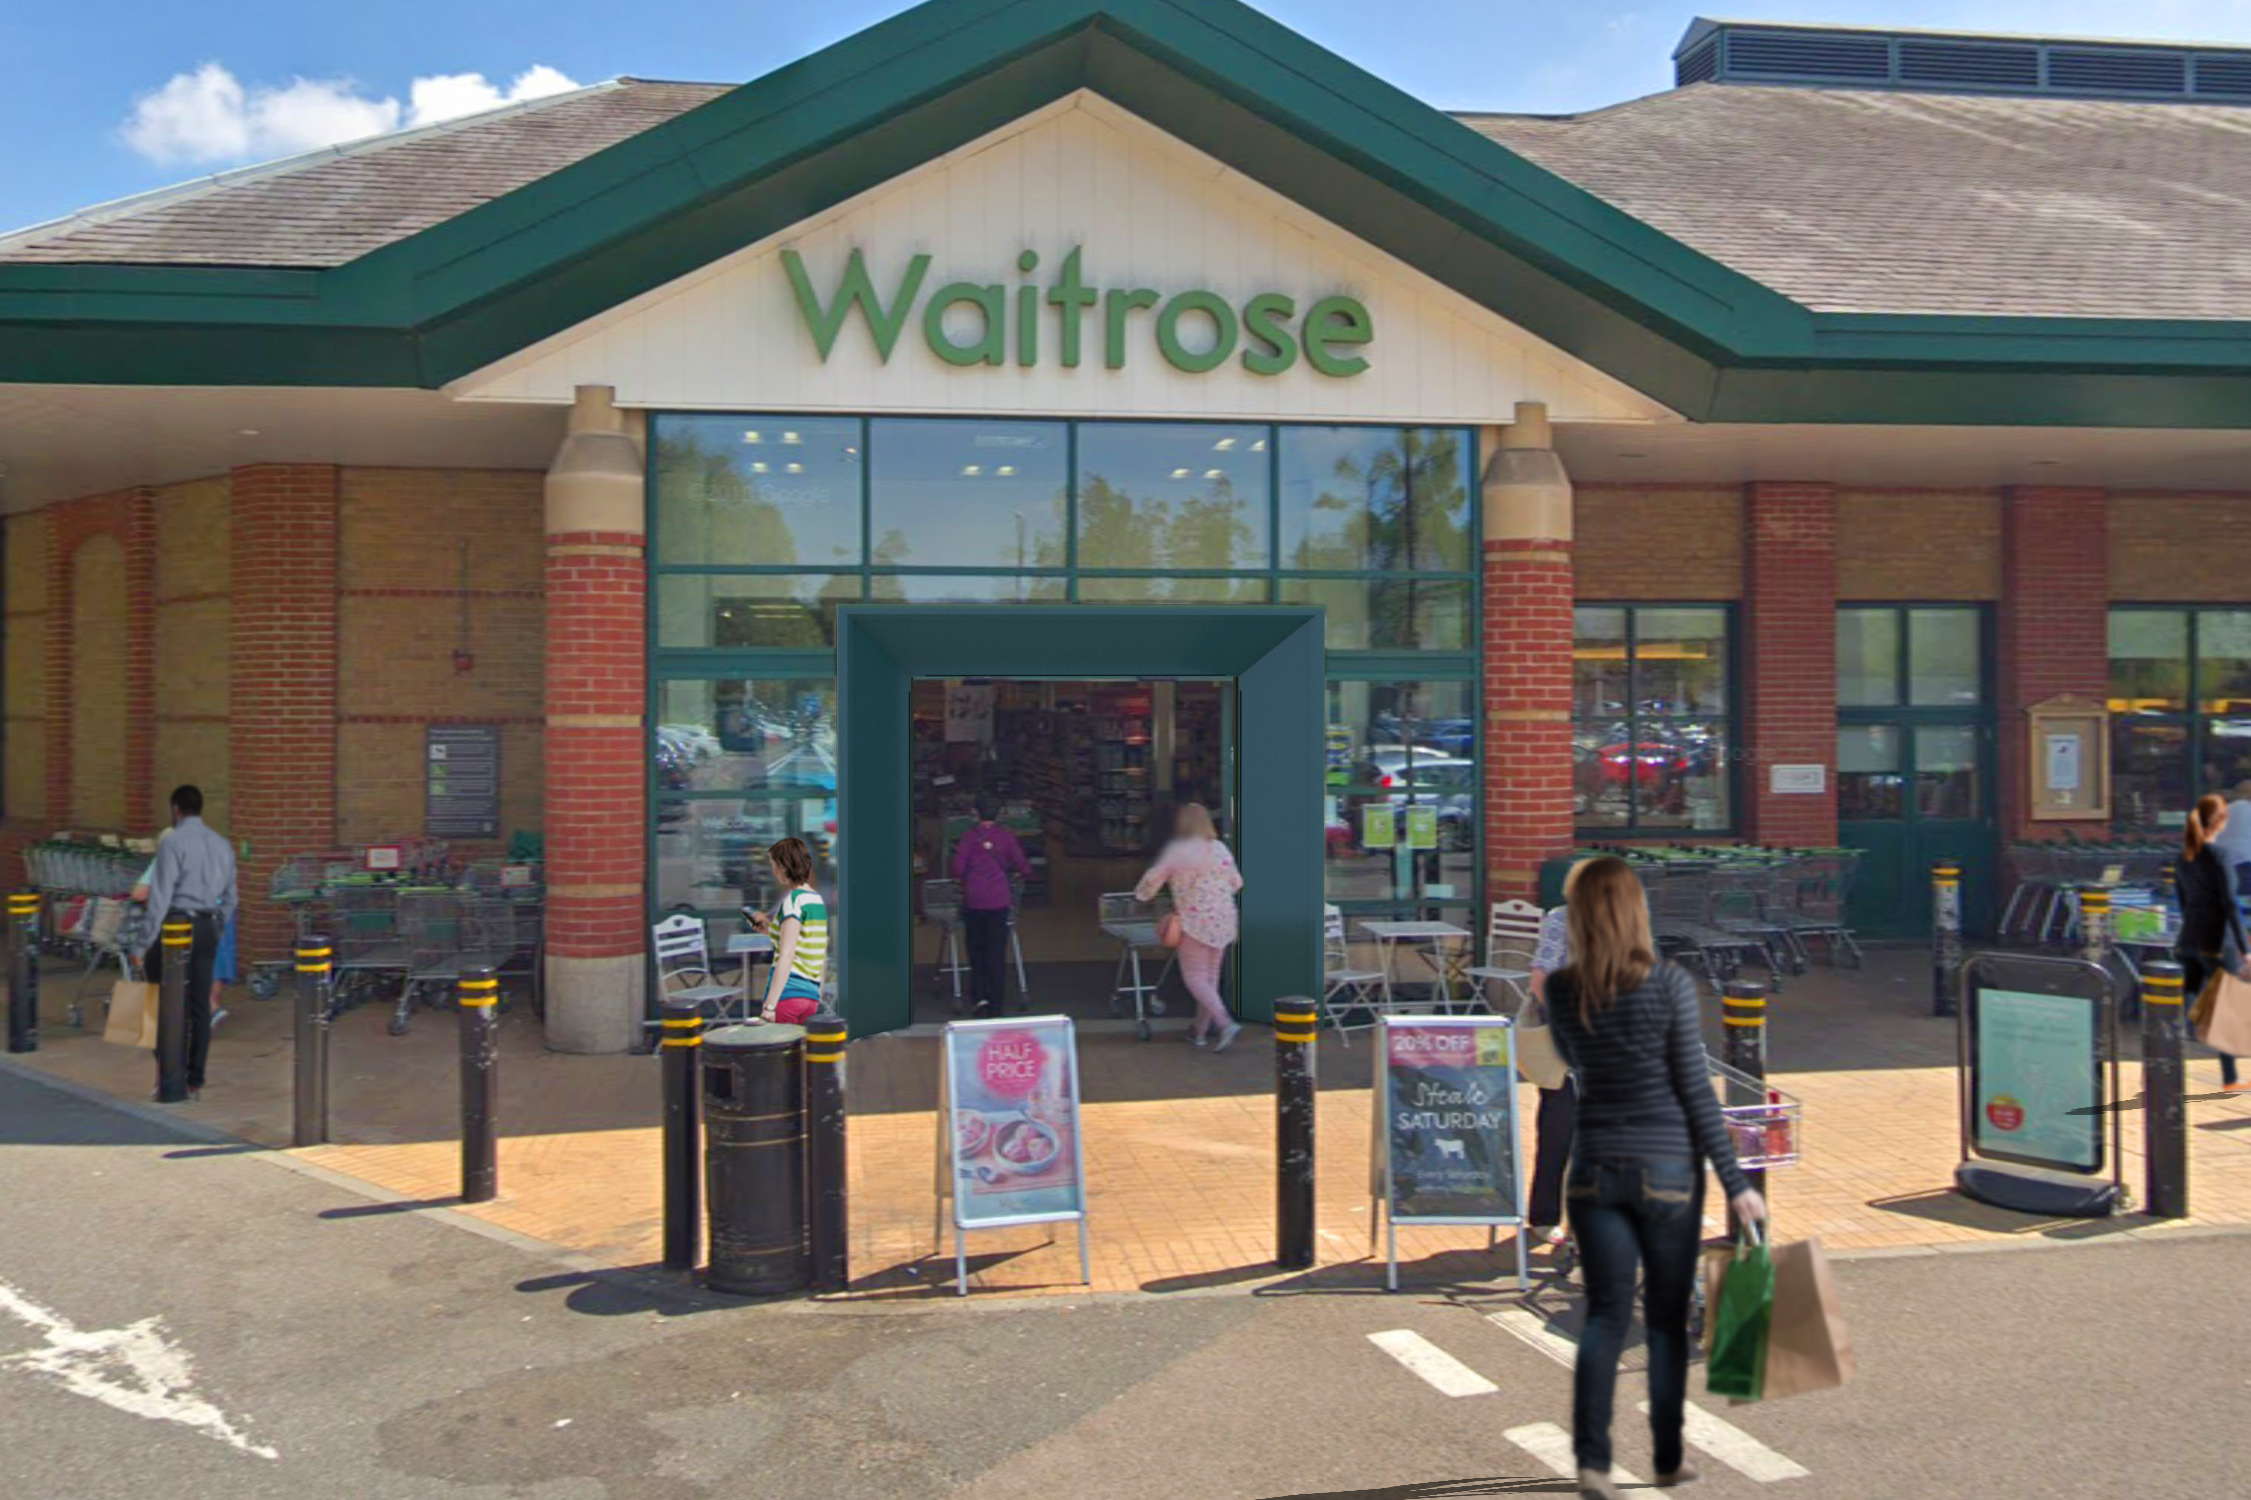 And finally… Waitrose to introduce energy-saving ‘invisible’ doors